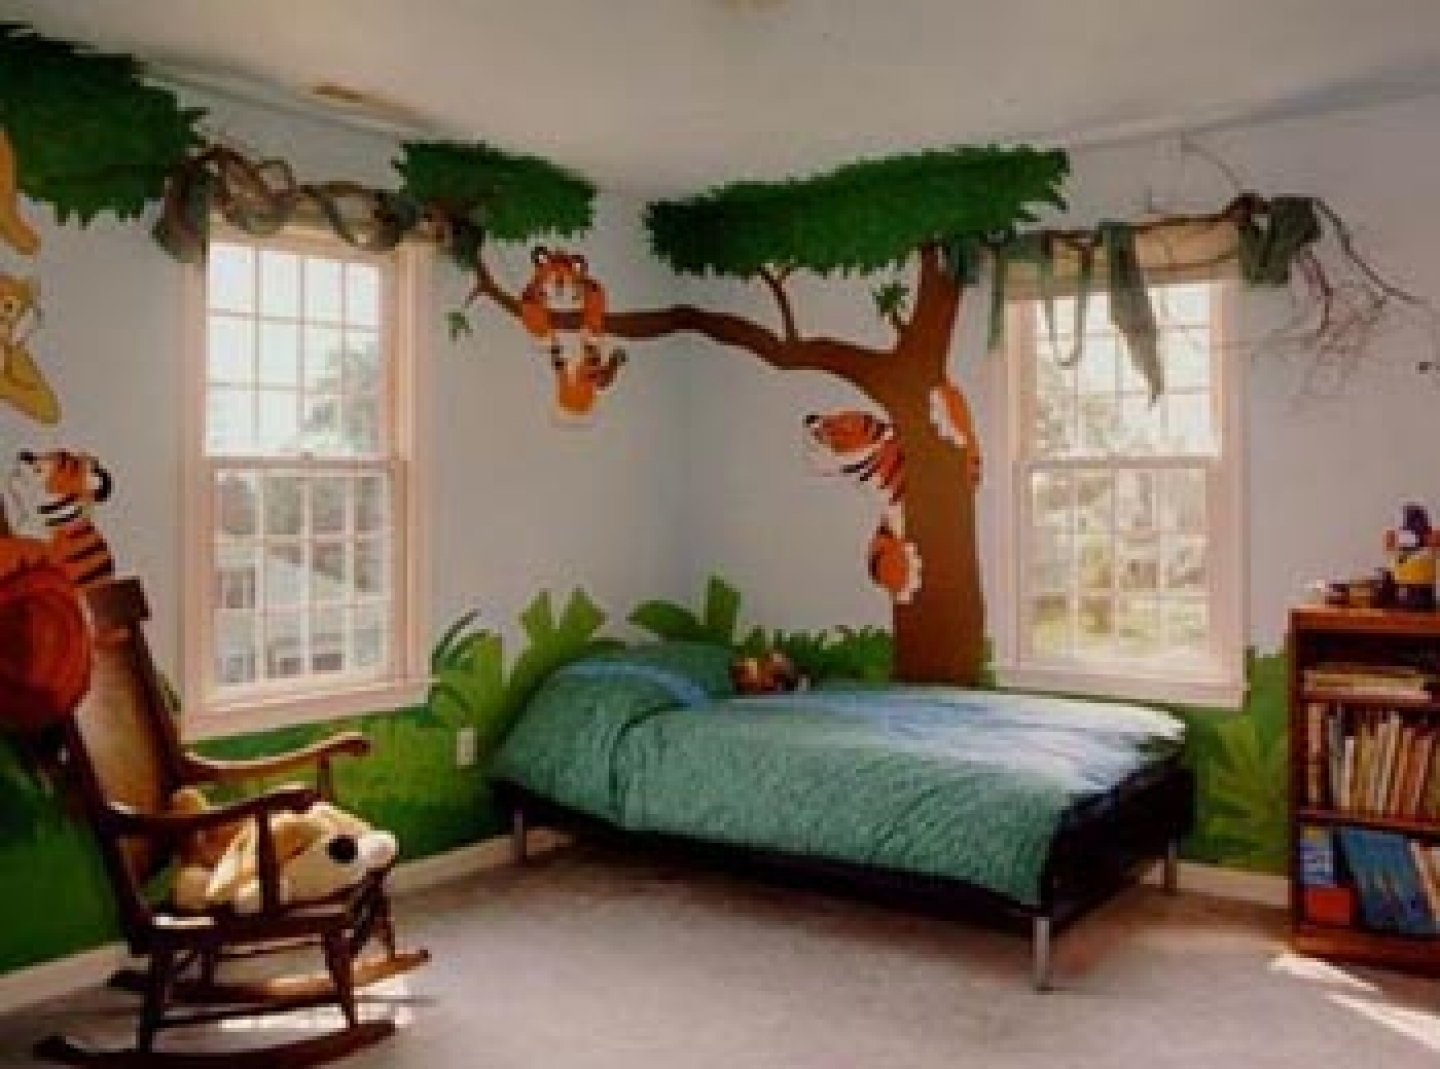 Wallpapers for kids rooms decor modern home design and decorating